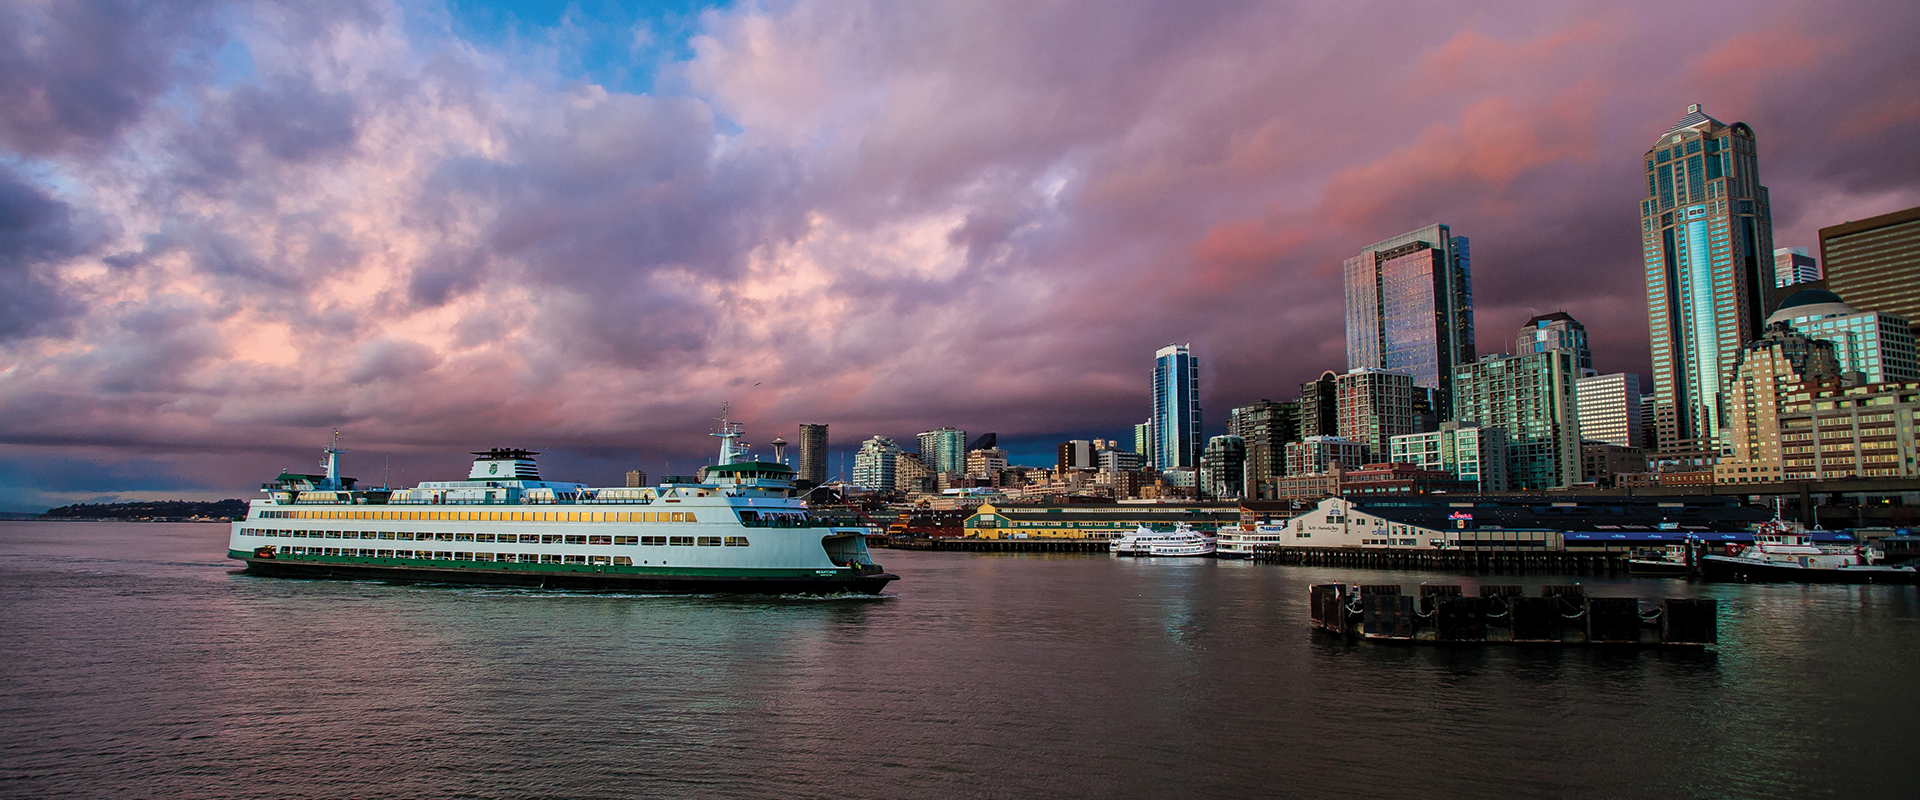 A ferry arriving in downtown Seattle, with pink and purple clouds in the sky